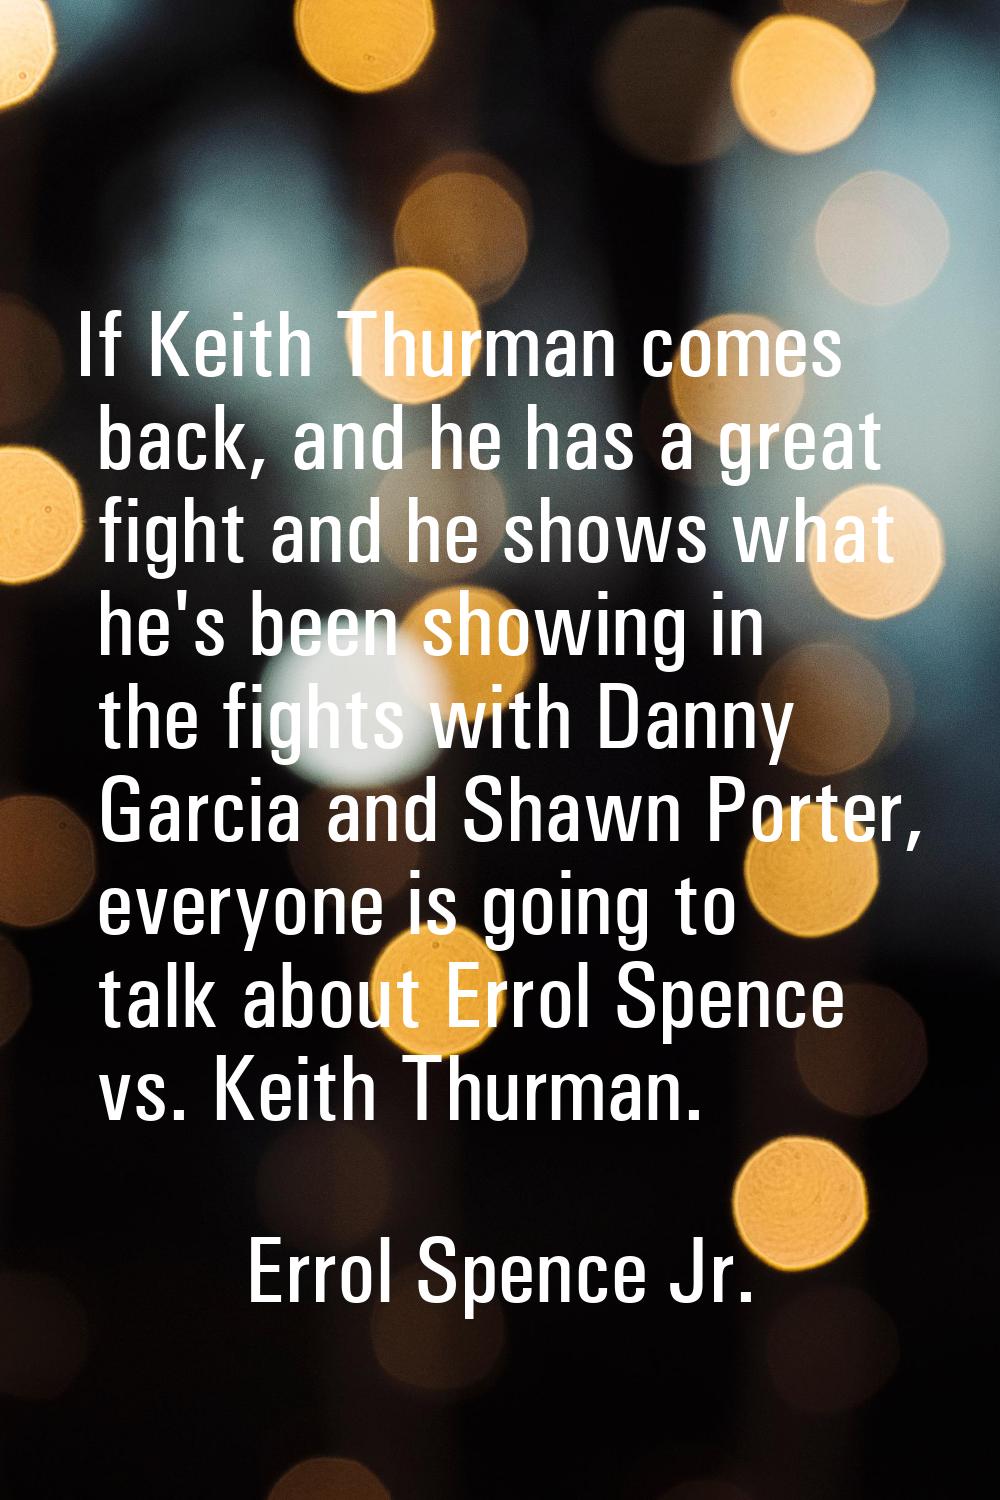 If Keith Thurman comes back, and he has a great fight and he shows what he's been showing in the fi